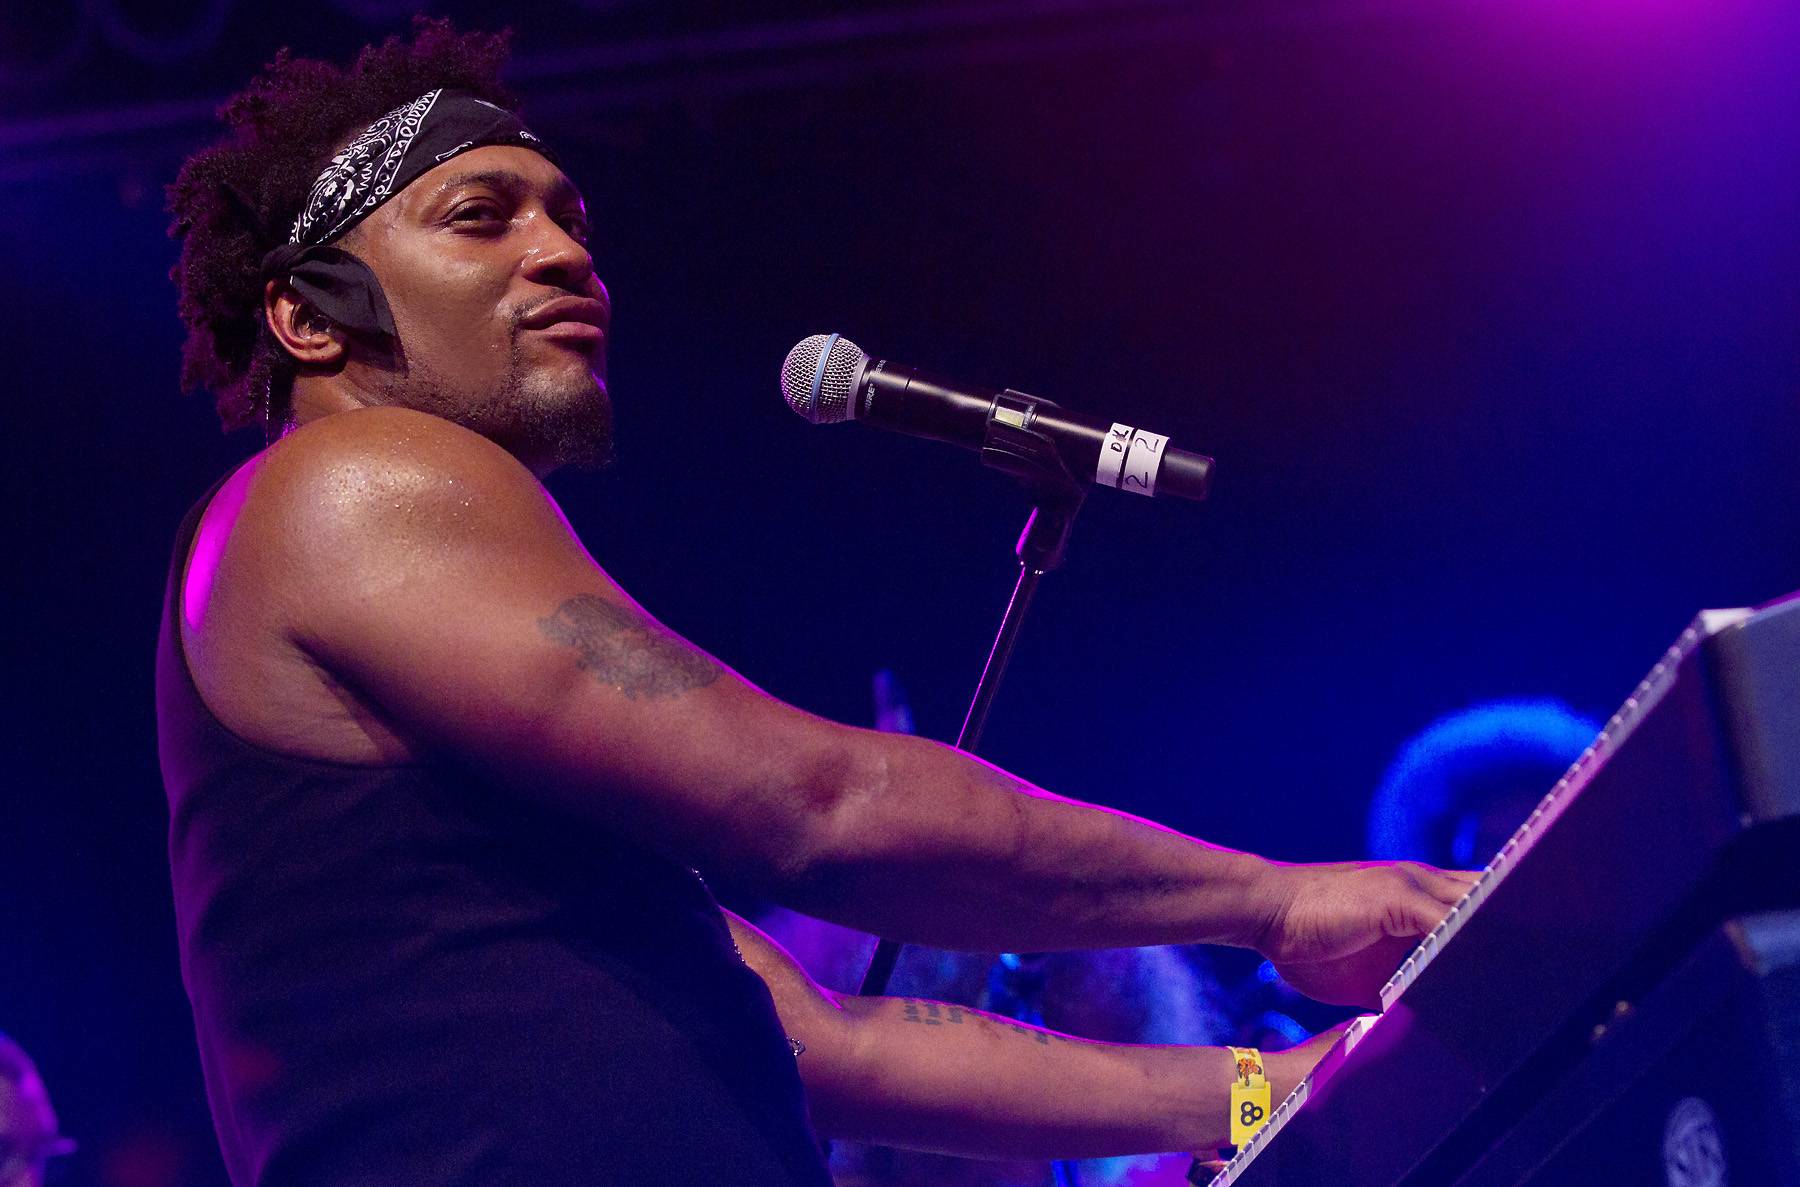 June 10, 2012: Surprise Homecoming - Just this month, D’Angelo warmed up for his U.S. tour with first stateside performance in over a decade at the music fest, Bonnarroo. Musically directed by Questlove, an awesome collection of Questo’s friends played alongside D’Angelo including, Time guitarist Jesse Johnson and Pino Palladino, bassist for the Who.&nbsp; This time, he didn’t perform any of his signature hits but he did perform some classics like&nbsp;Led Zeppelin's &quot;What Is and What Should Never Be&quot; and the Beatles' &quot;She Came in Through the Bathroom Window.&quot;&nbsp;(Photo: AP Photo/Dave Martin)